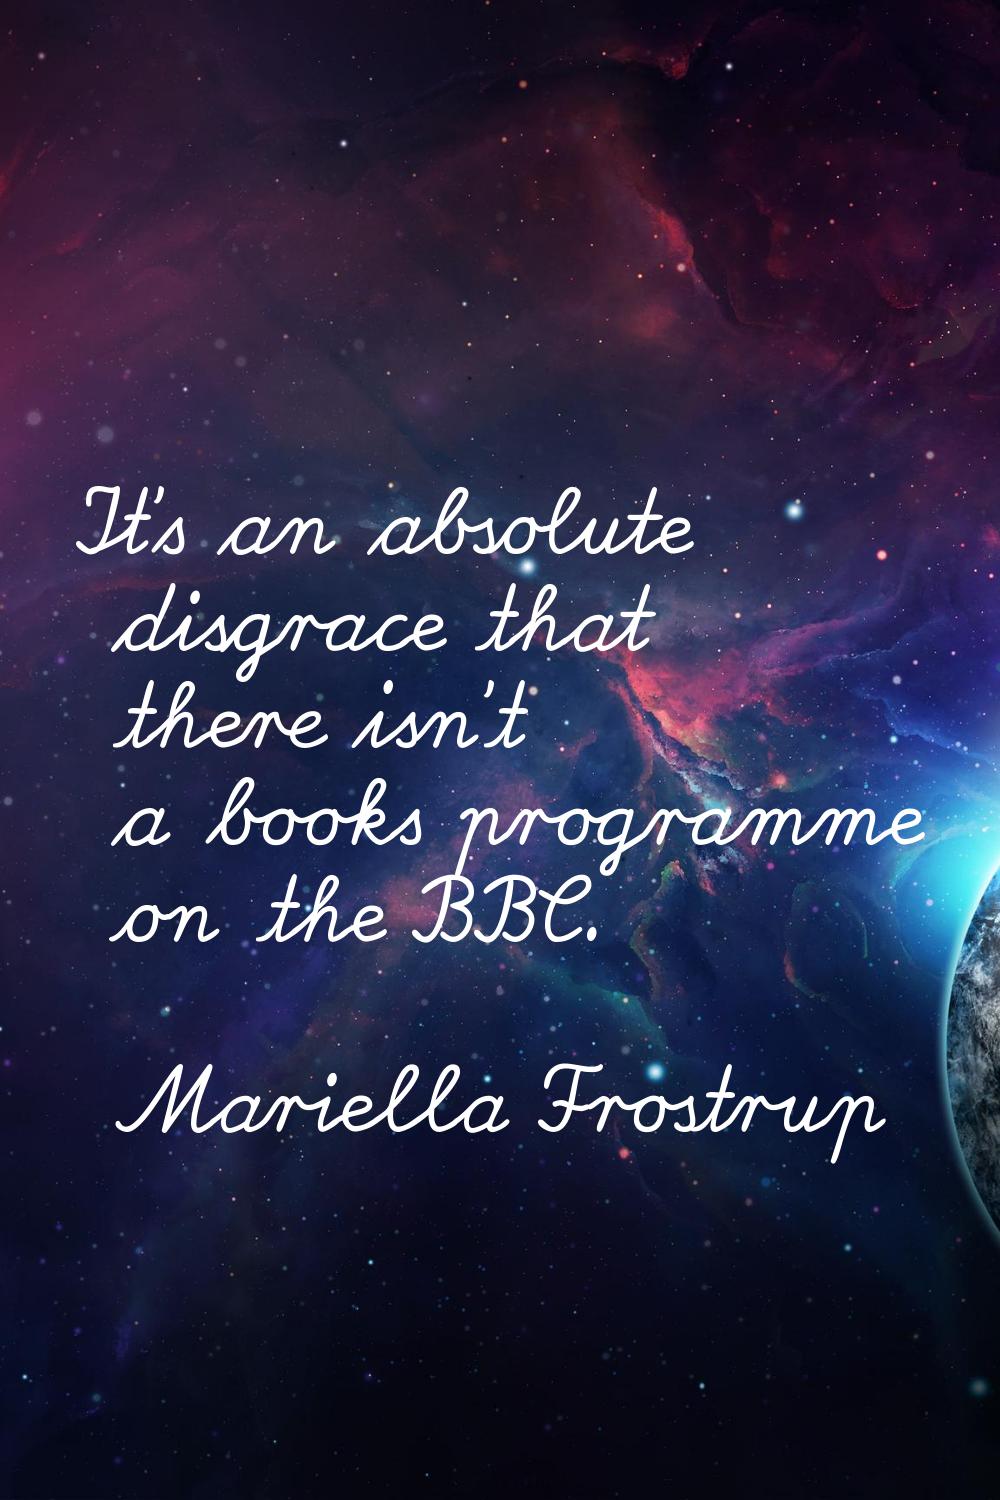 It's an absolute disgrace that there isn't a books programme on the BBC.